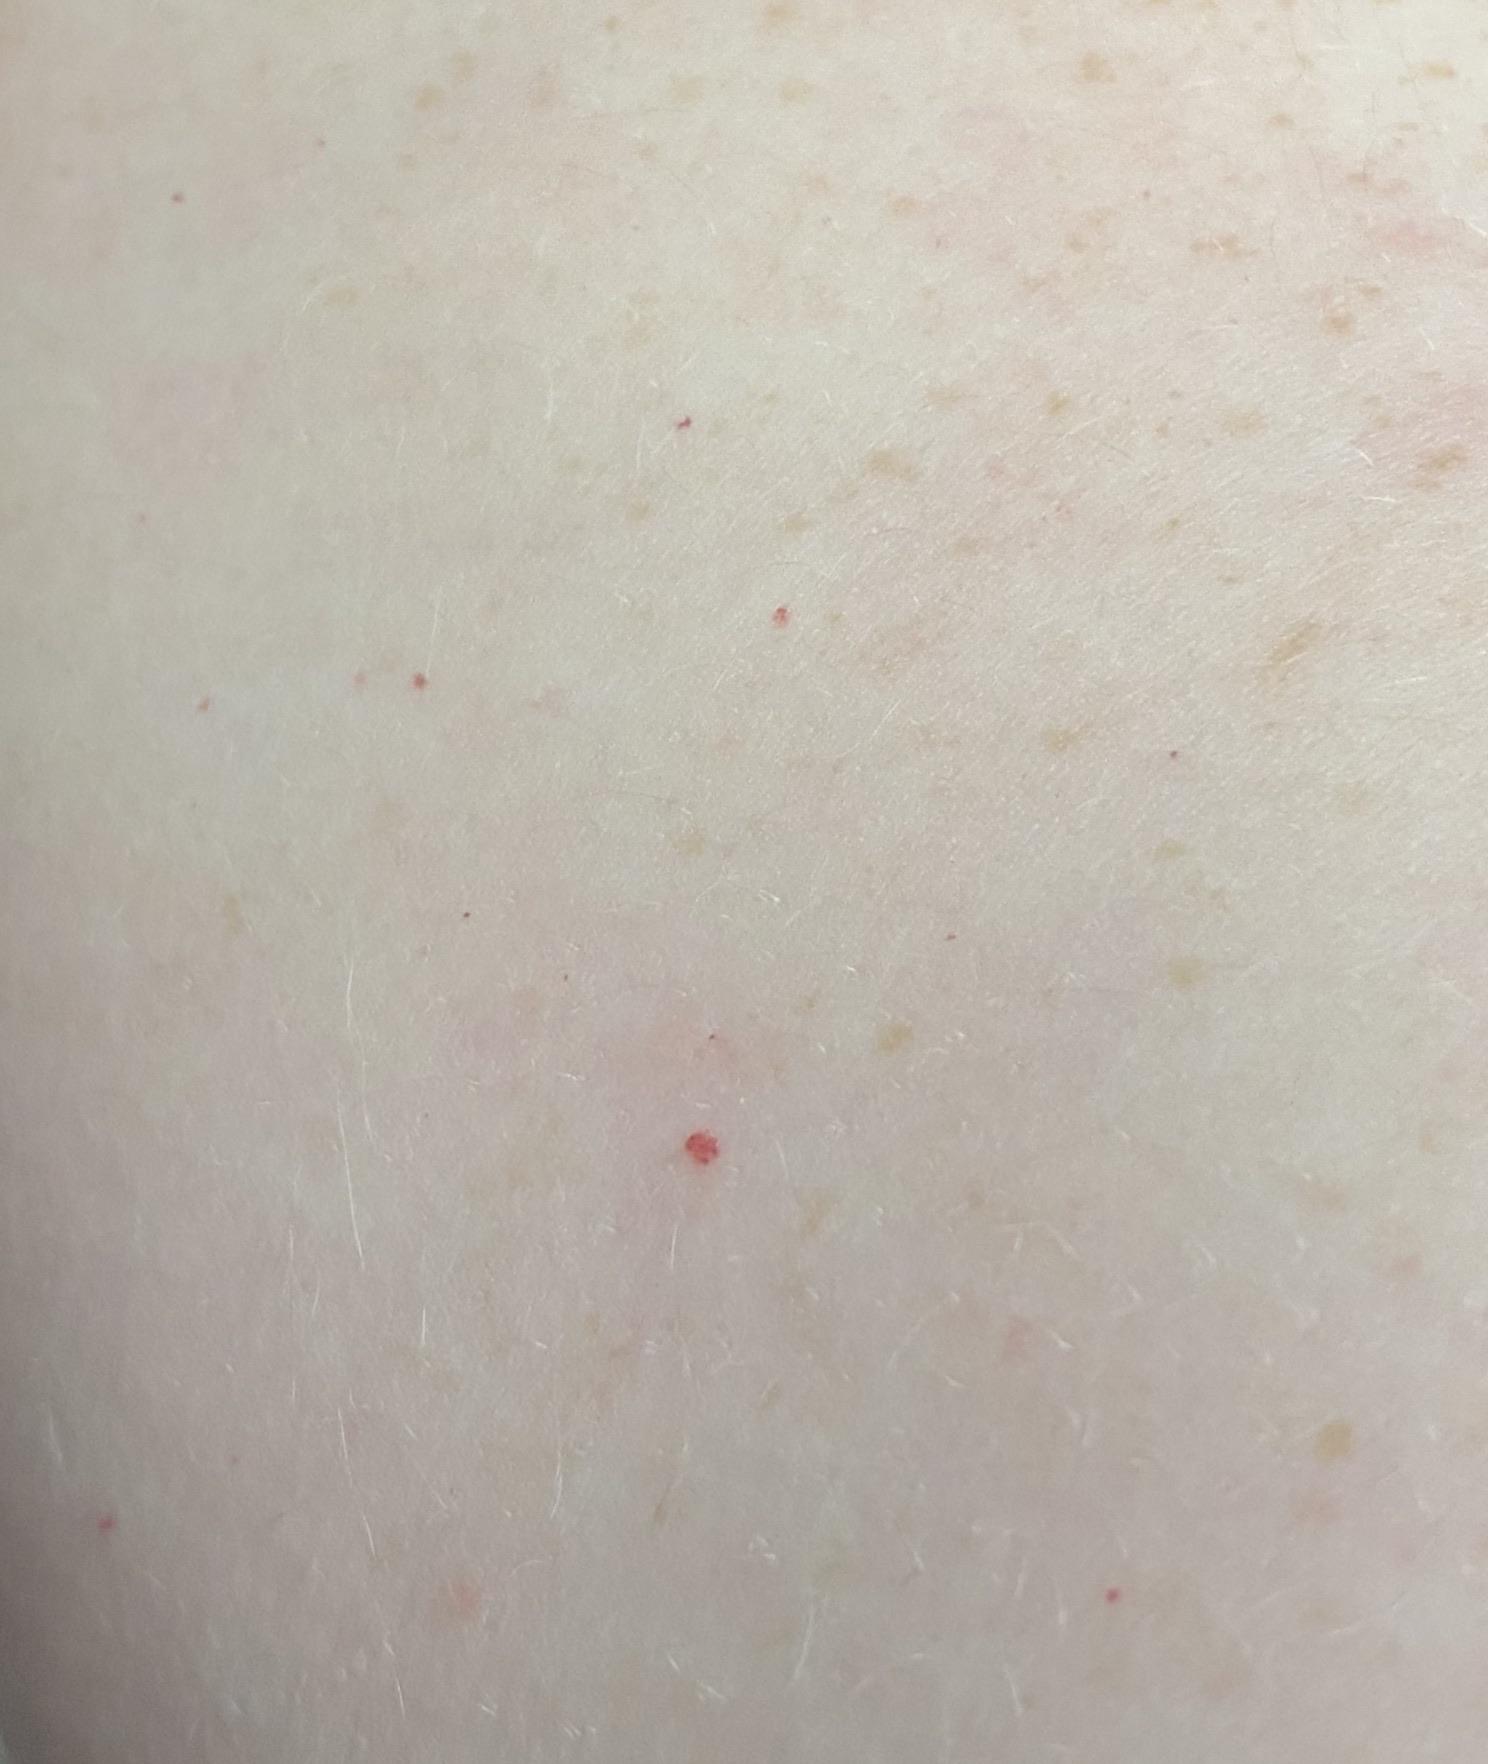 What are these little red dots on my arms? : Dermatology